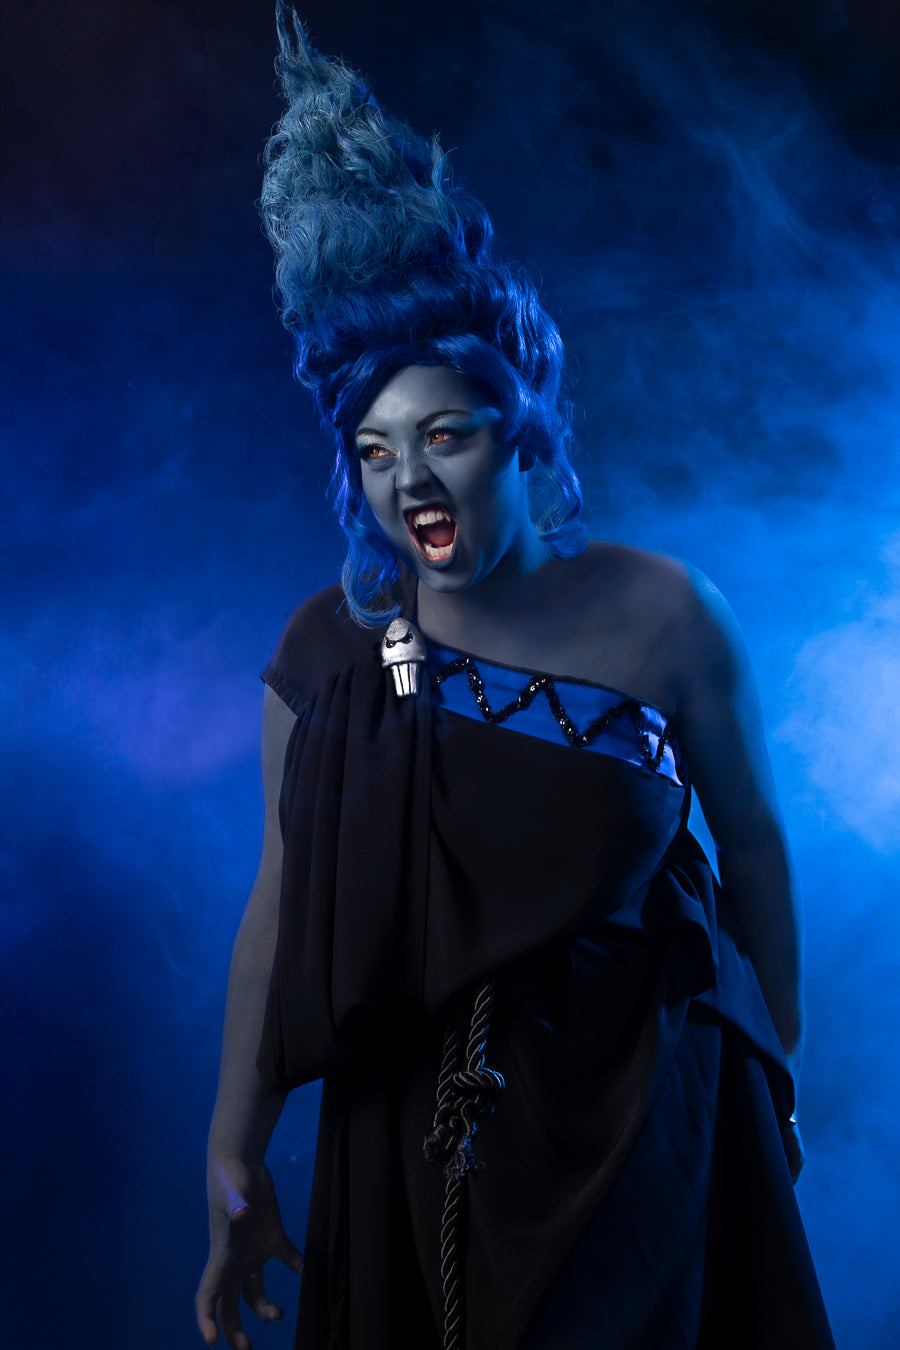 Hades, The God of The Underworld, inspired by Disney's Hercules Costume Hire or Cosplay & Wig, plus Makeup and Photography. Proudly by and available at, Little Shop of Horrors Costumery 6/1 Watt Rd Mornington & Melbourne